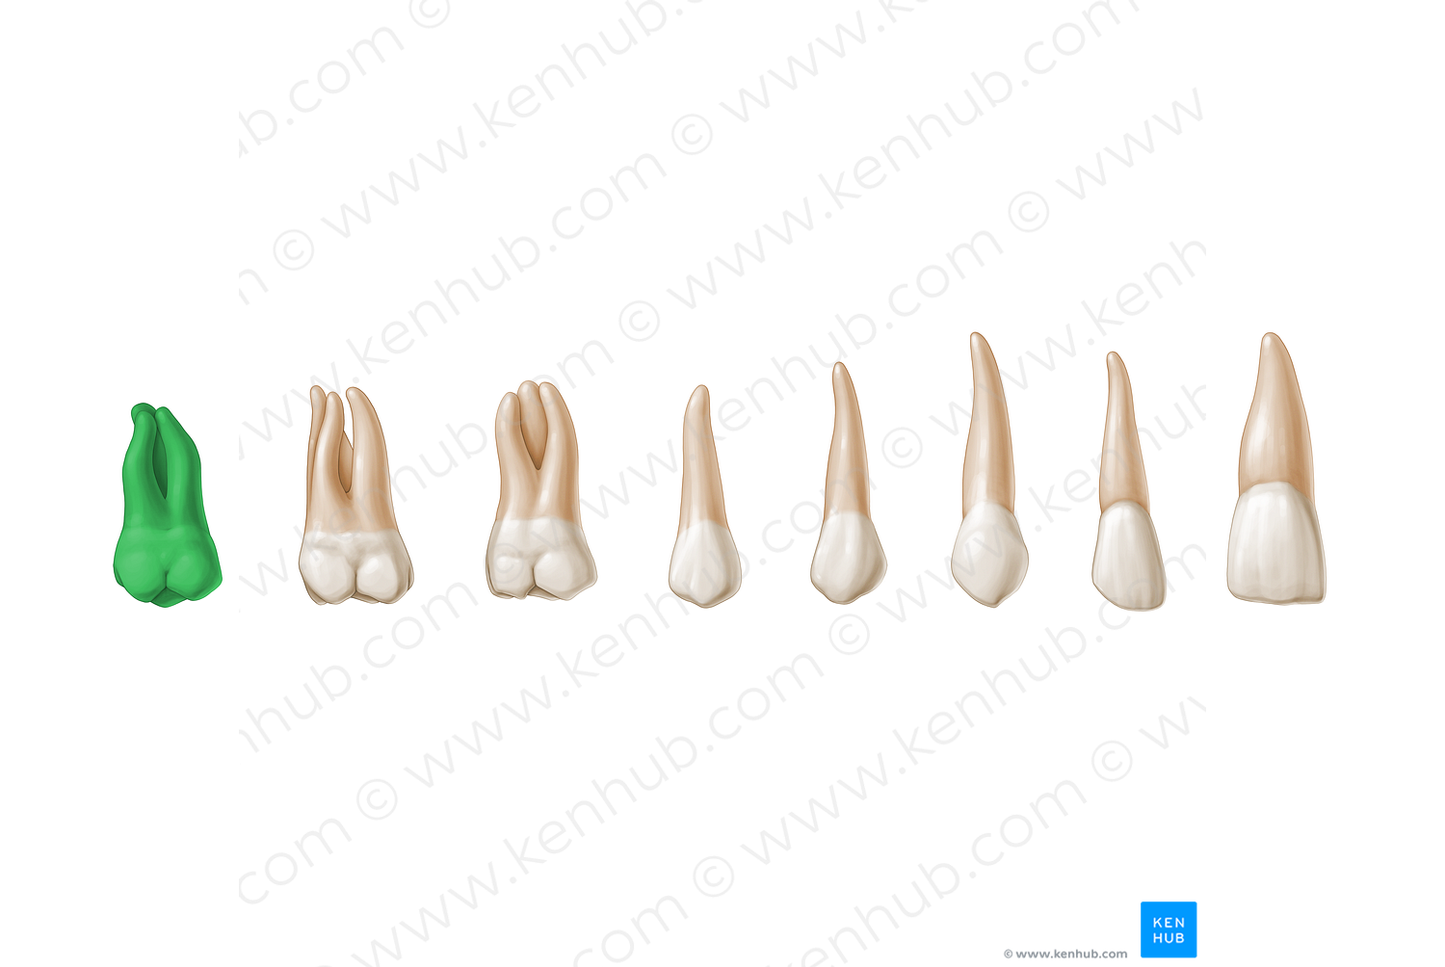 3rd molar tooth (#3222)